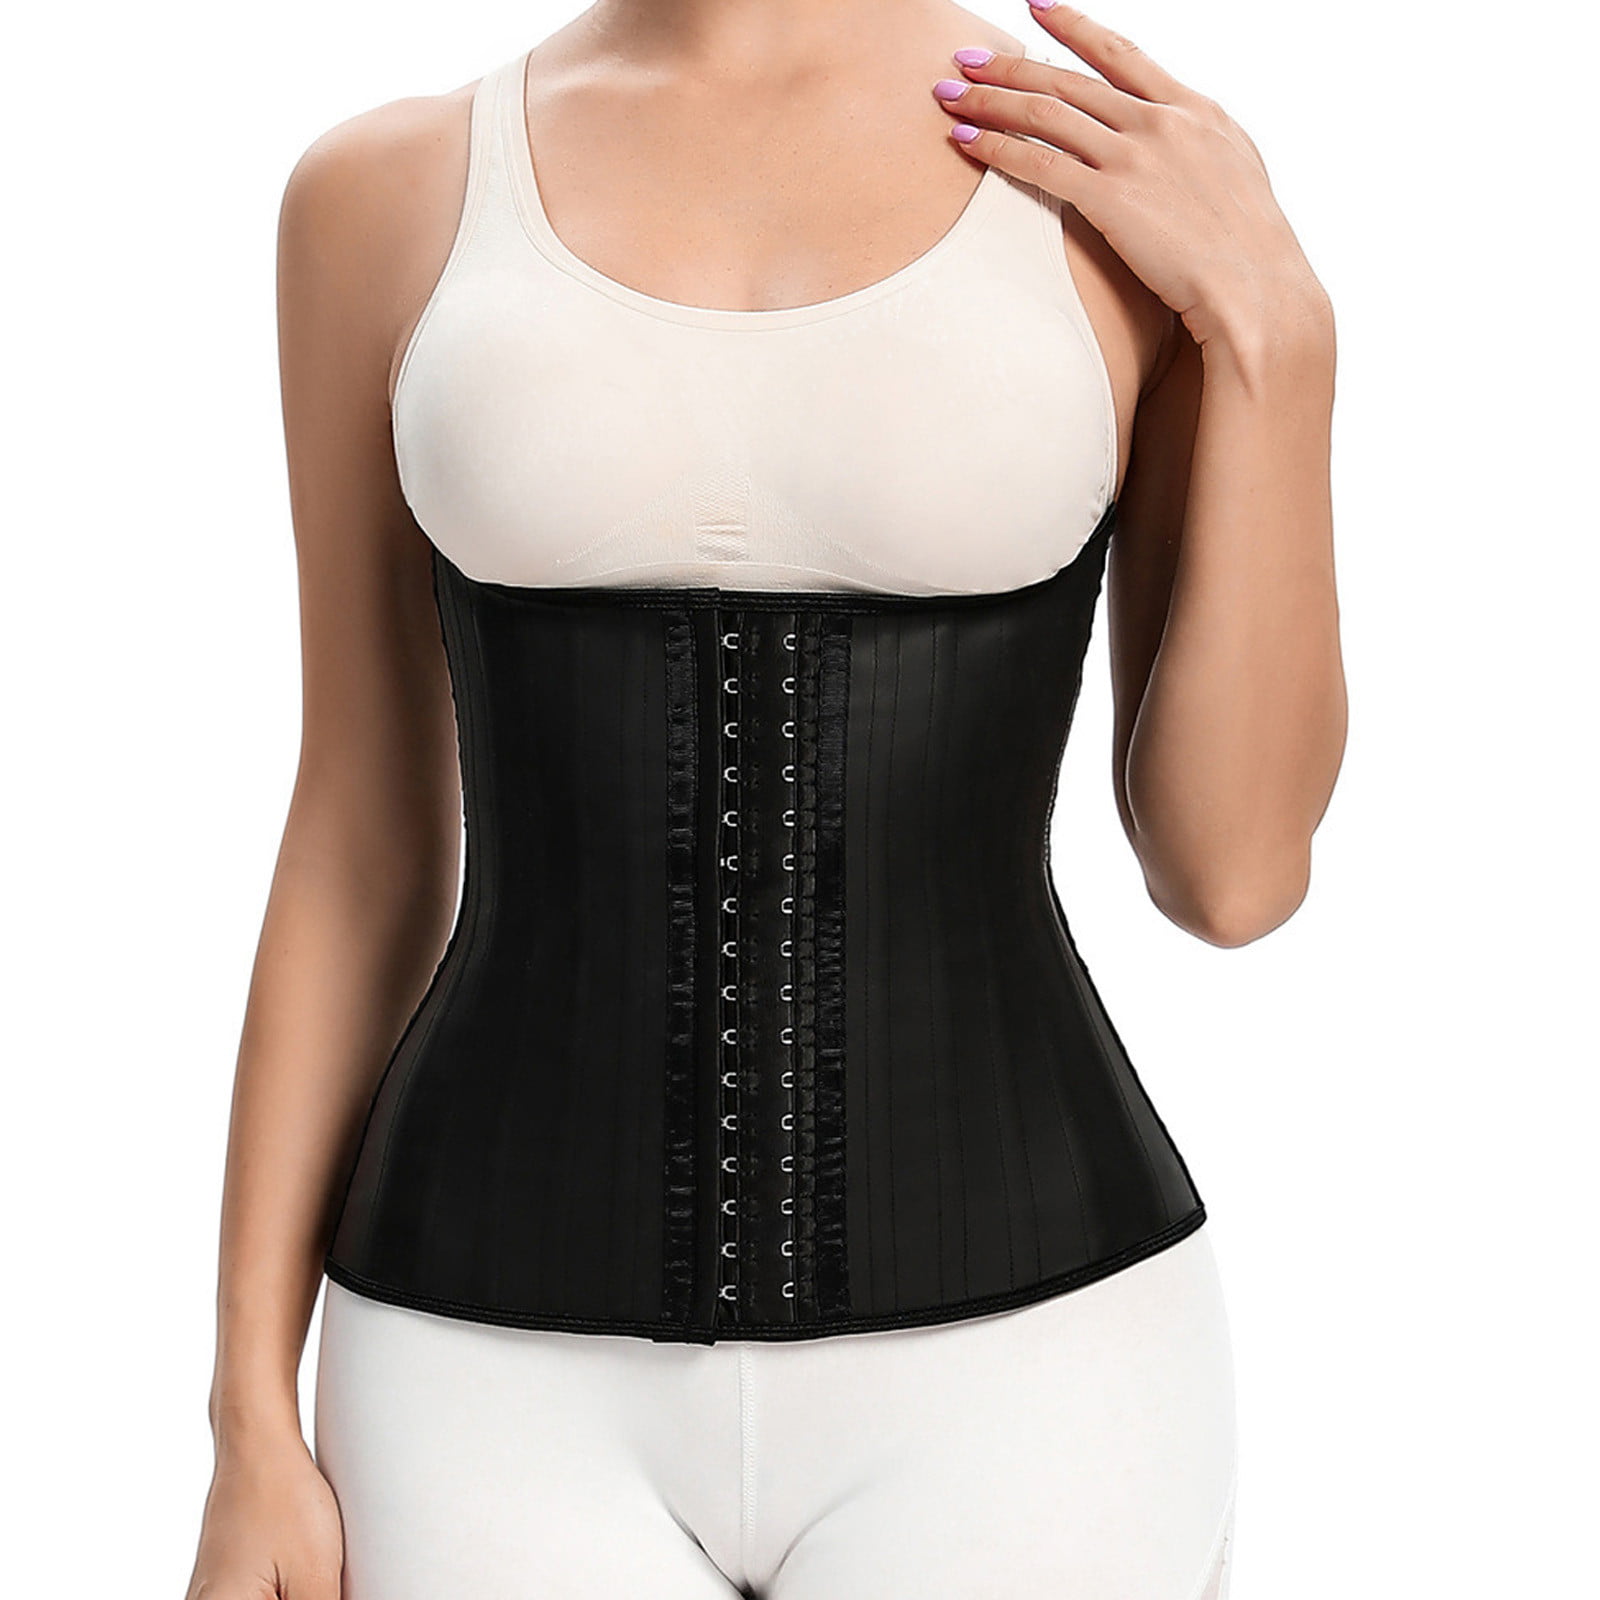 Short Torso Corset for Slimming Waist Trainer Gothic Bustiers and Corsets  Underbust Hourglass Curve Shapewear Women Plus Size